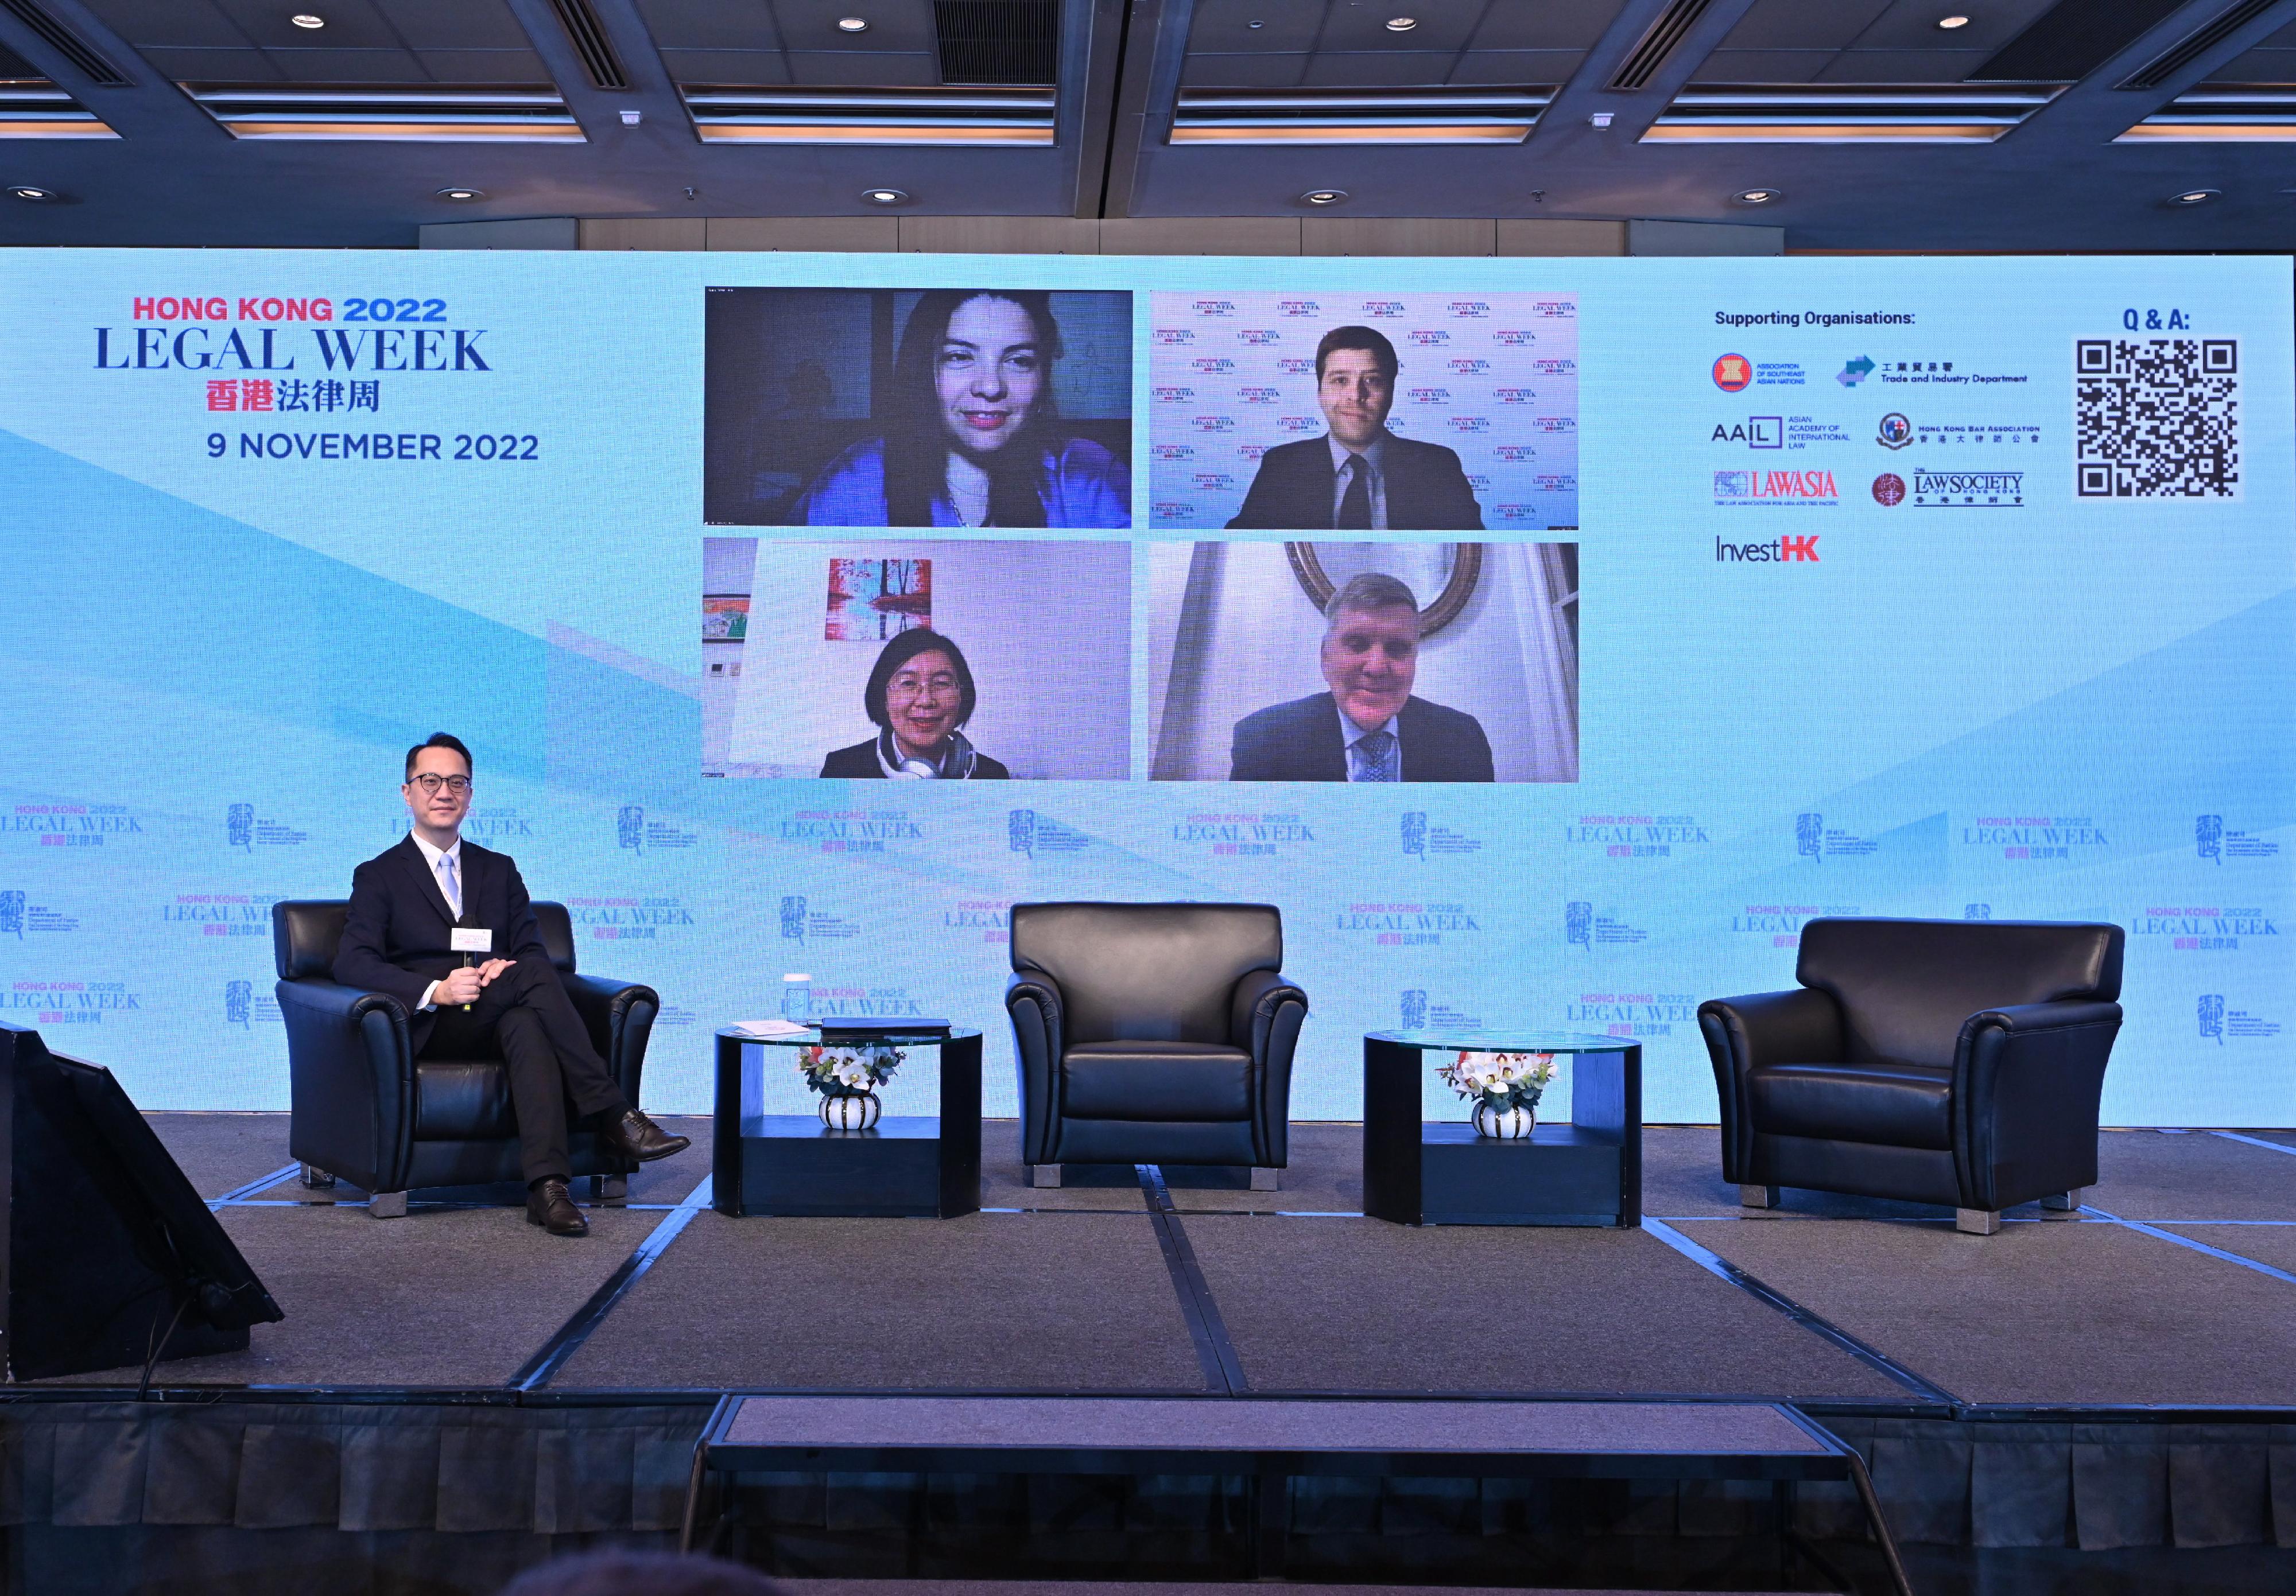 The five-day Hong Kong Legal Week 2022, an annual flagship event of the Department of Justice, continued today (November 9). Photo shows Co-Founder of Prister Corporation Limited Mr Terrence Hui (seated); the Chief Executive Officer of Resolución en Línea, Mr Benjamin Astete-Heimpell (top right on screen); Senior Advisor of the Kozolchyk National Law Center, United States, Mr Michael Dennis (bottom right on screen); Head of the Office of Studies and International Affairs at the Santiago Arbitration and Mediation Centre, Chile, Ms Laura Aguilera-Villalobos (top left on screen); and Professor of the School of Law, University of International Business and Economics, China, Professor Bian Yongmin (bottom left on screen), at session 1 on Role of ODR in Successful Conduct of E-Commerce & Cross Border Trade at the Workshop on ASEAN Online Dispute Resolution: ODR in Facilitating Cross-Border Trade and Investment for ASEAN and Hong Kong Businesses.